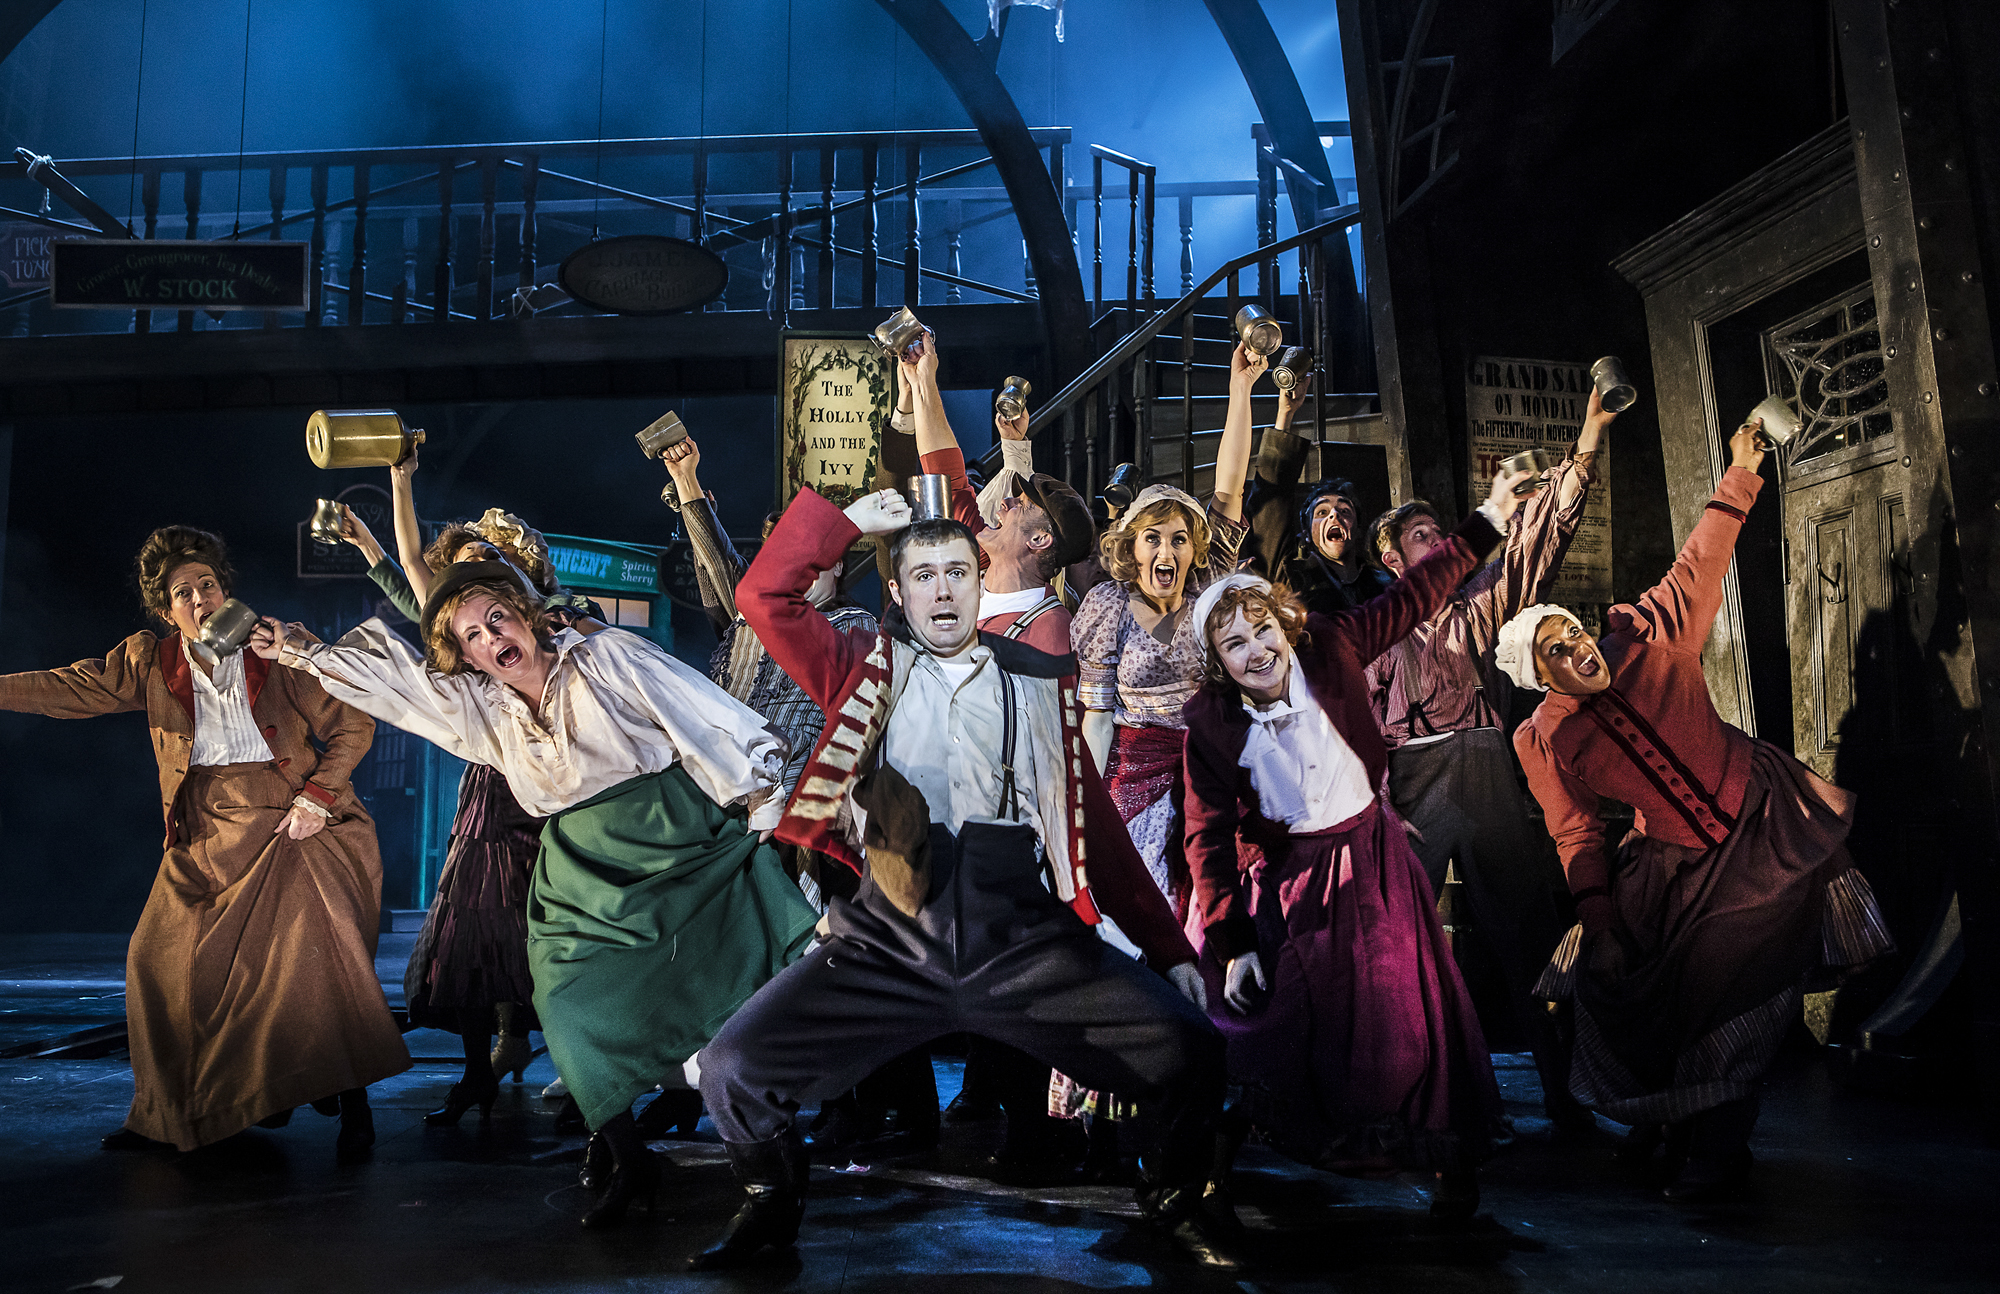 Production image from Scrooge. The company exclaim to the audience during a raucous pub scene on a darkly lit stage